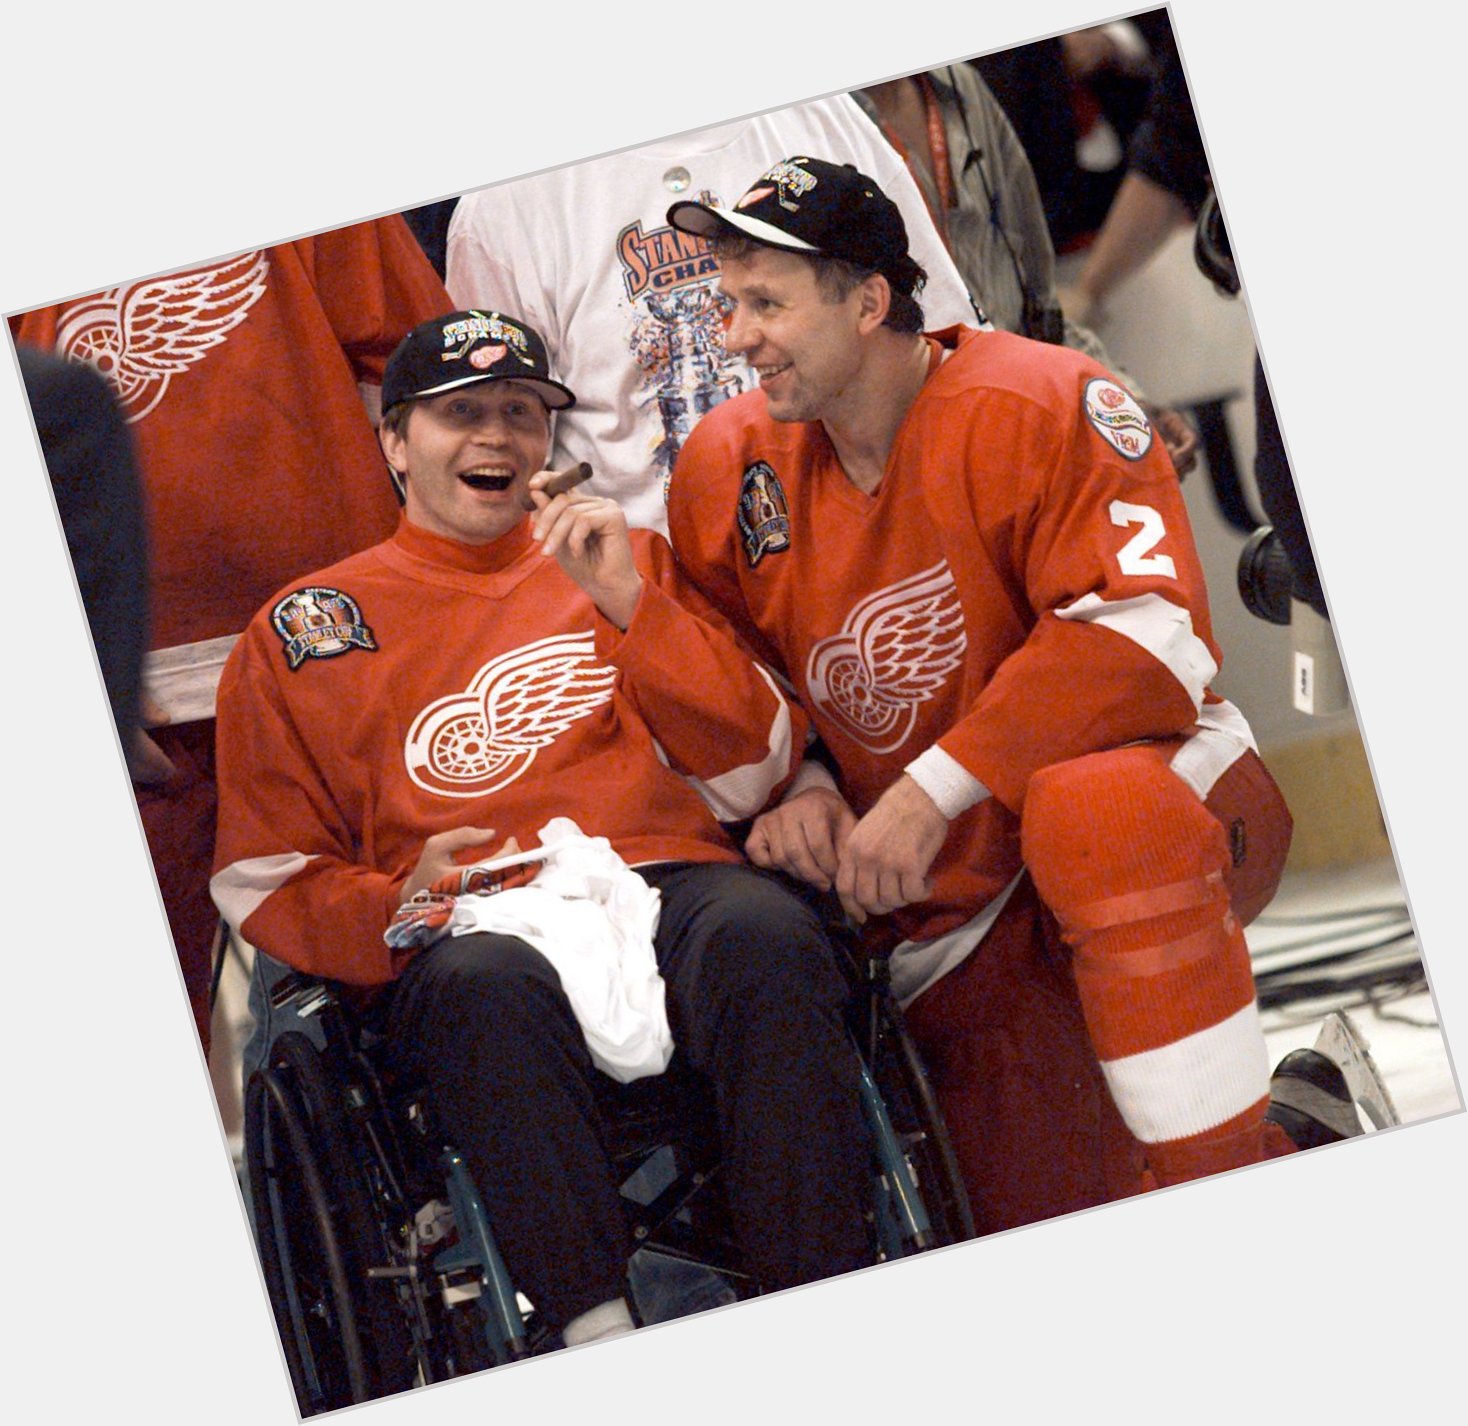 Happy birthday to the one and only Vladimir Konstantinov! 